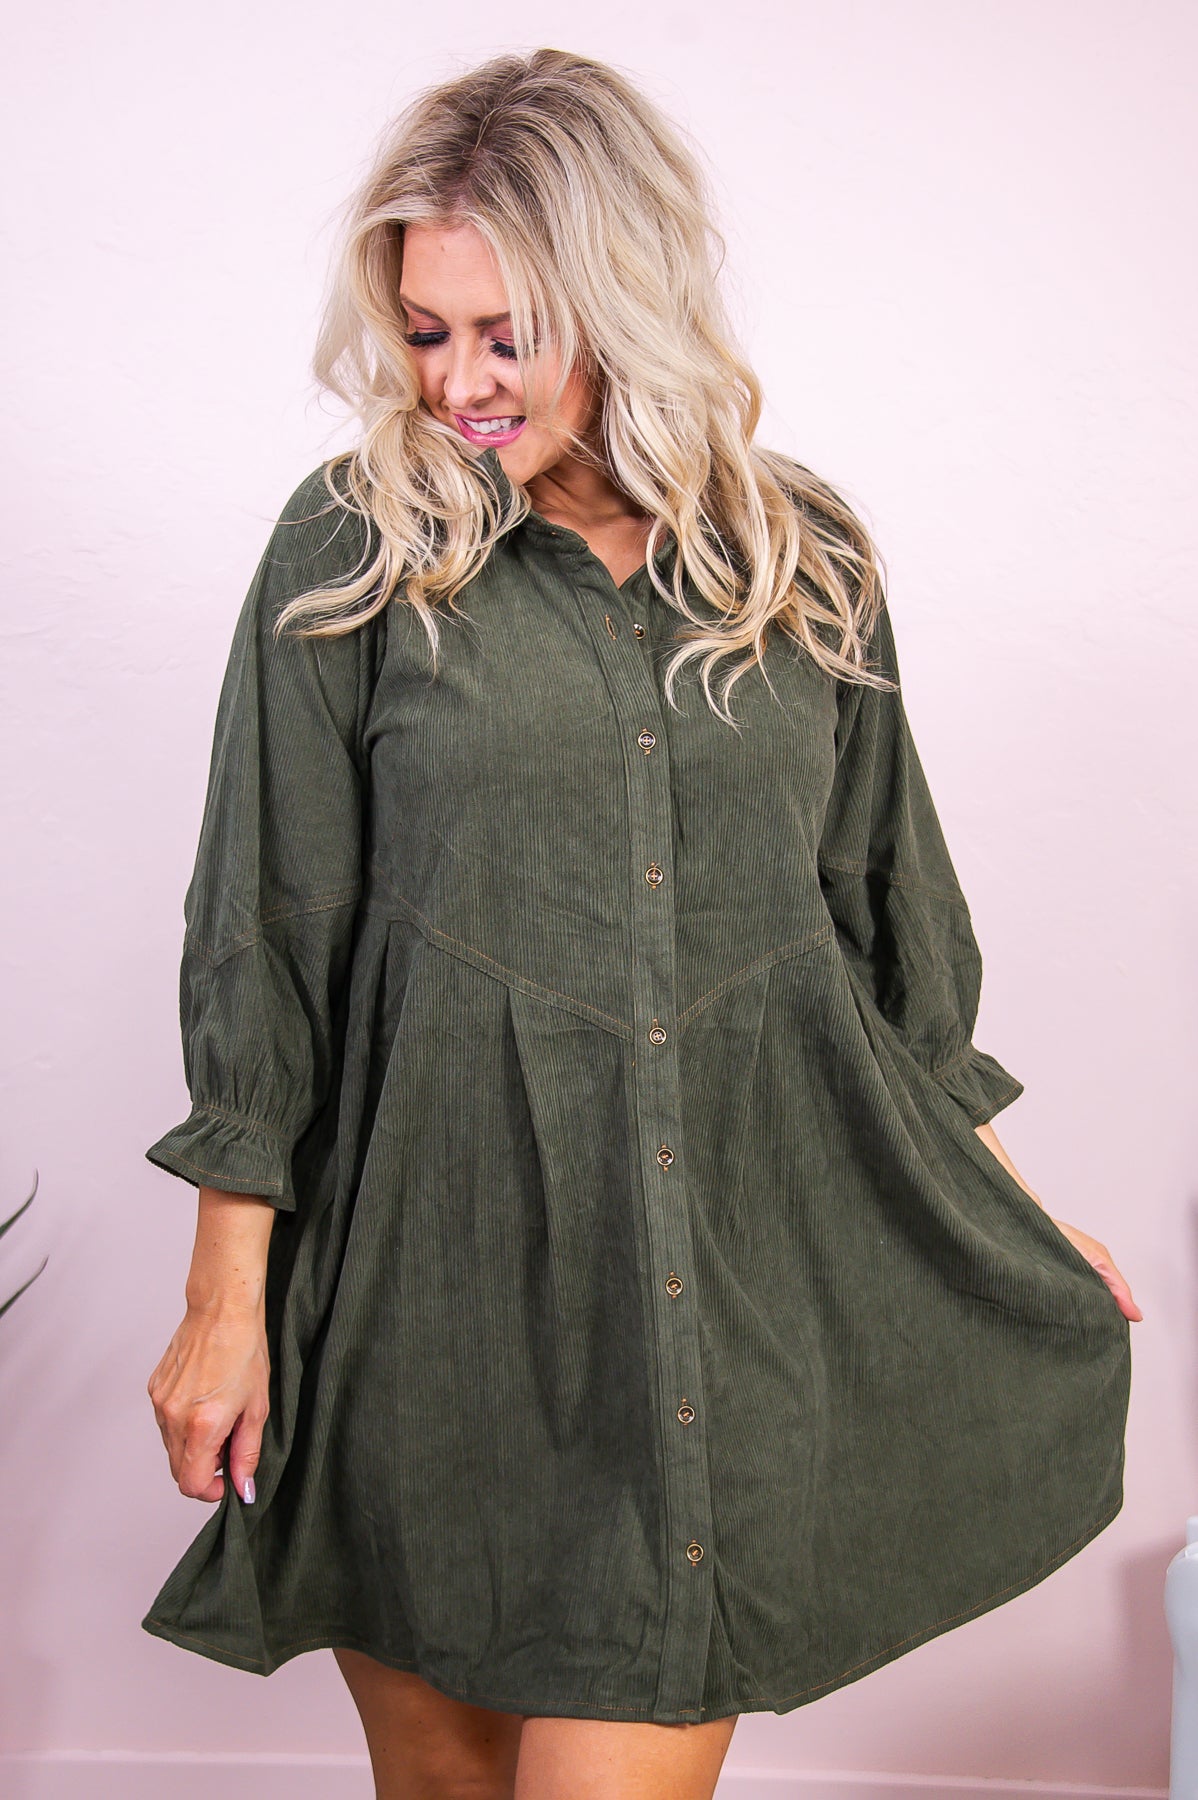 Take Me Out Dancing Olive Solid Dress - D4994OL